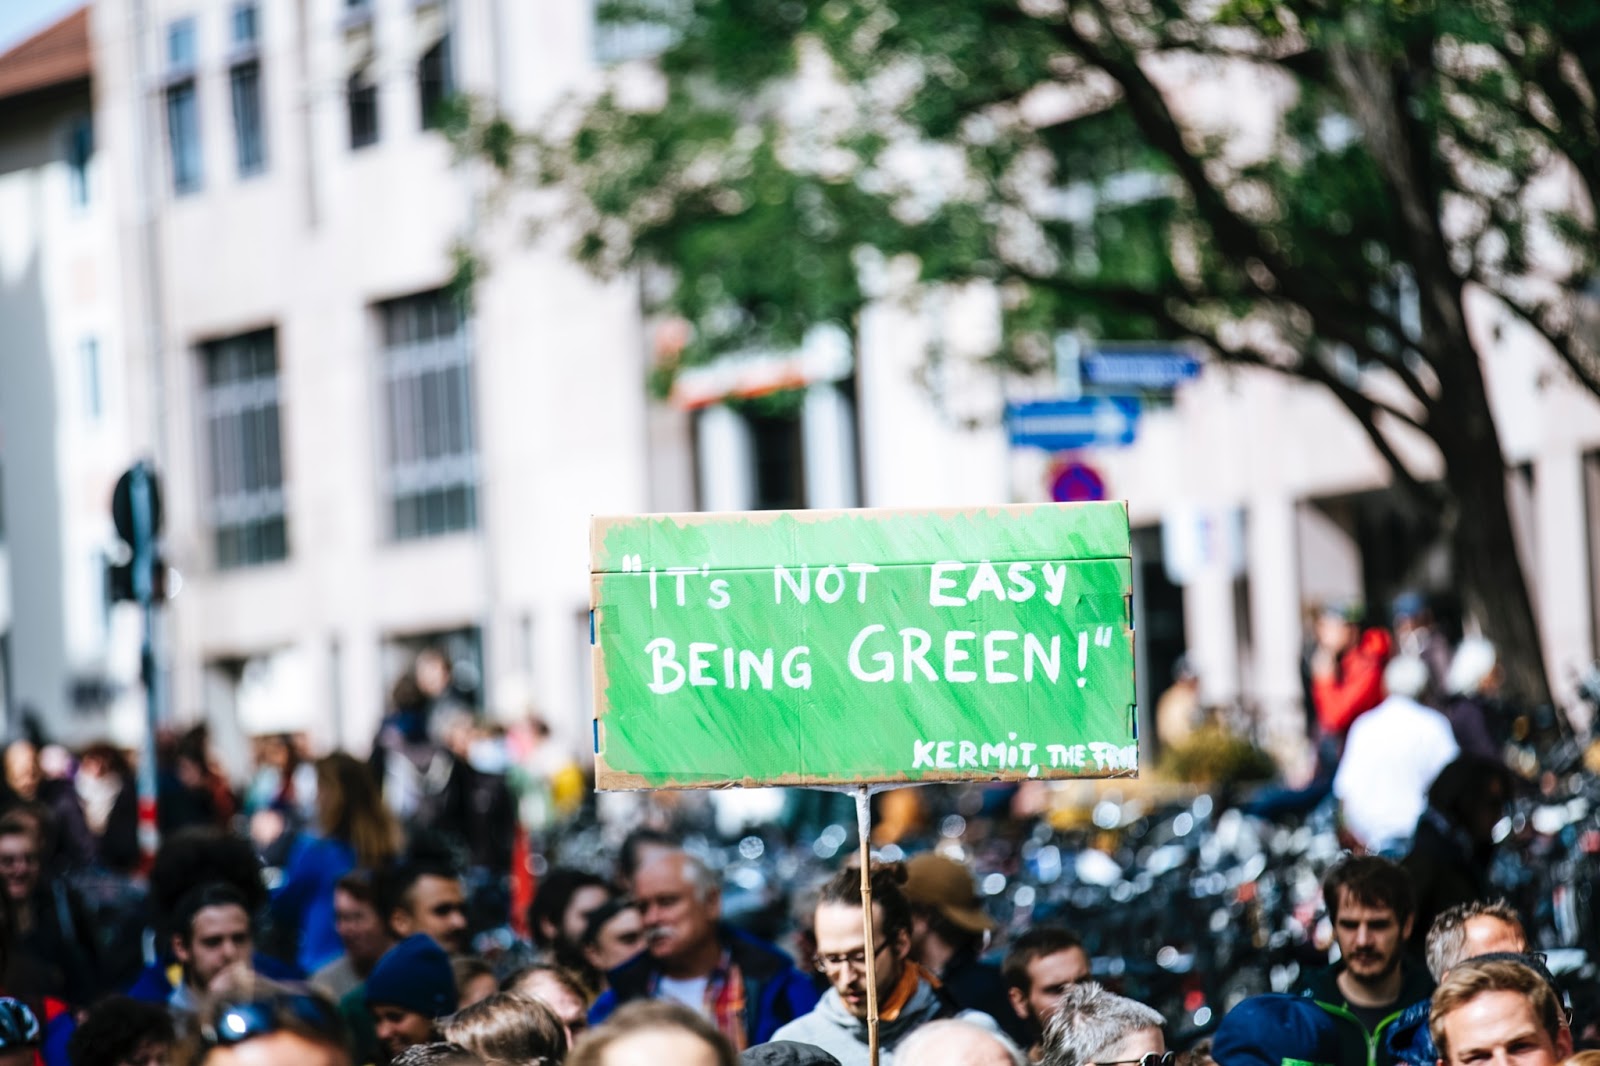 Pancarte « it’s not easy being green » pendant une manifestation